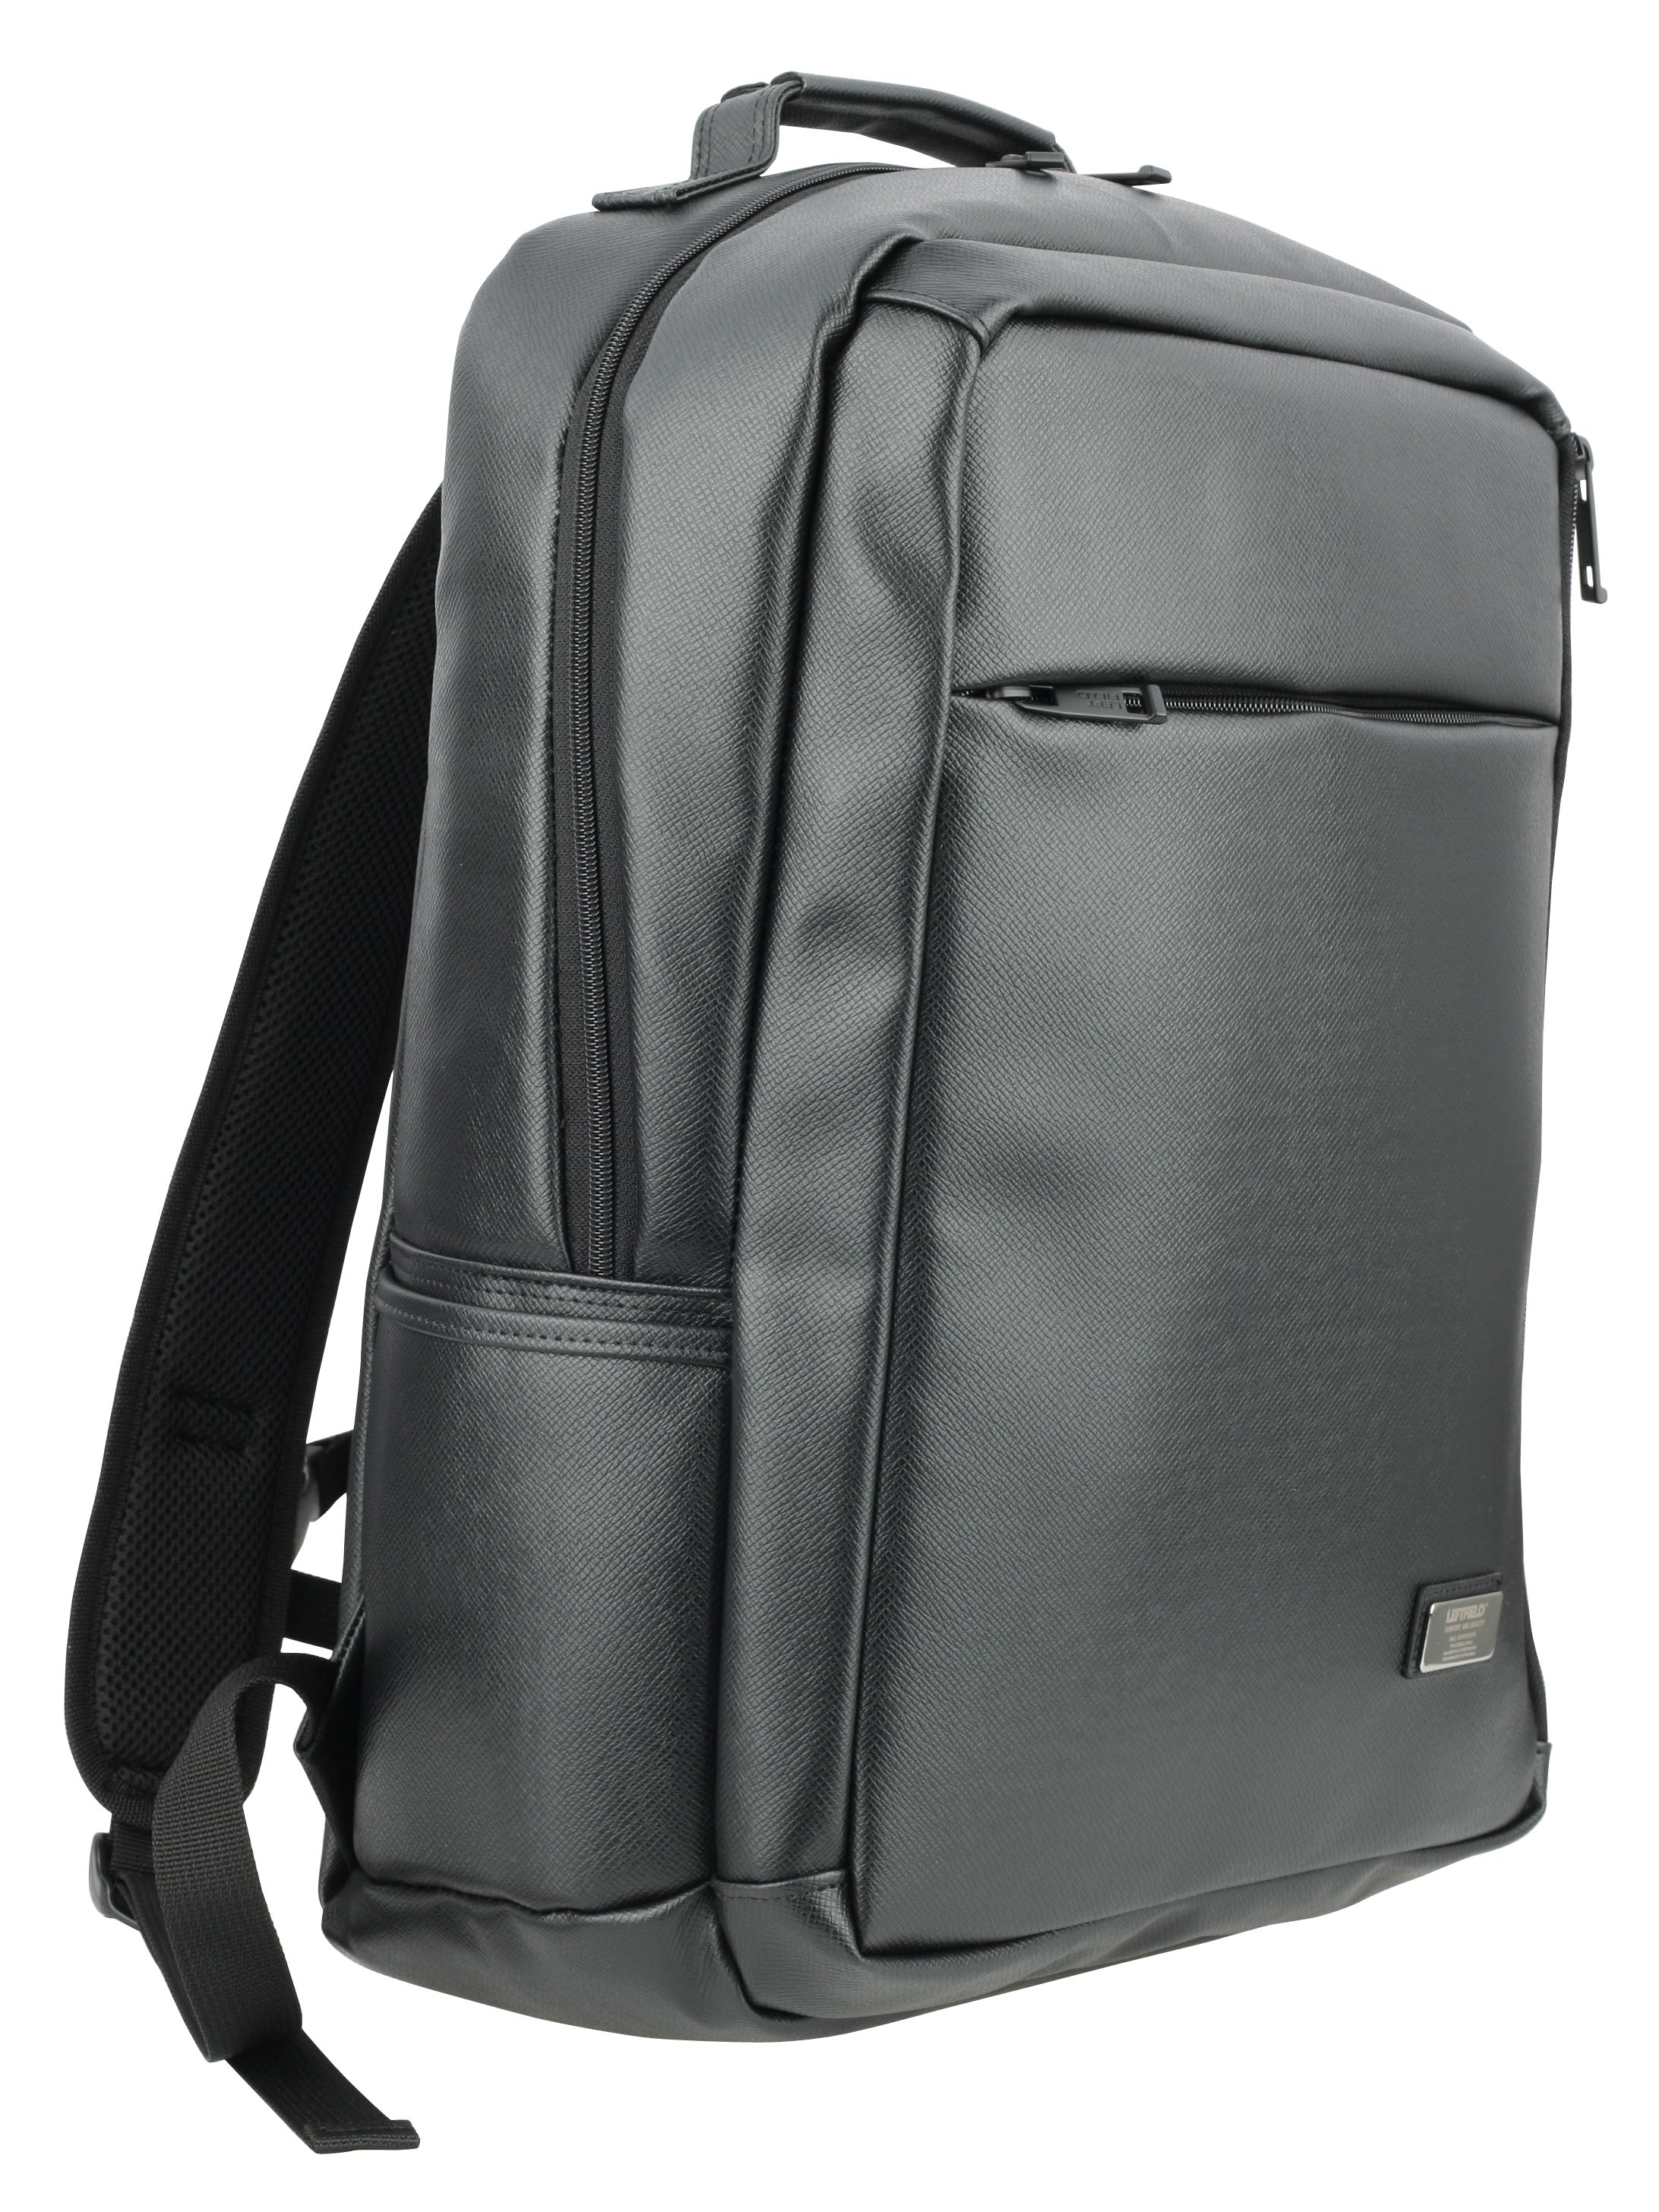 Black Synthetic Leather Laptop Backpacks